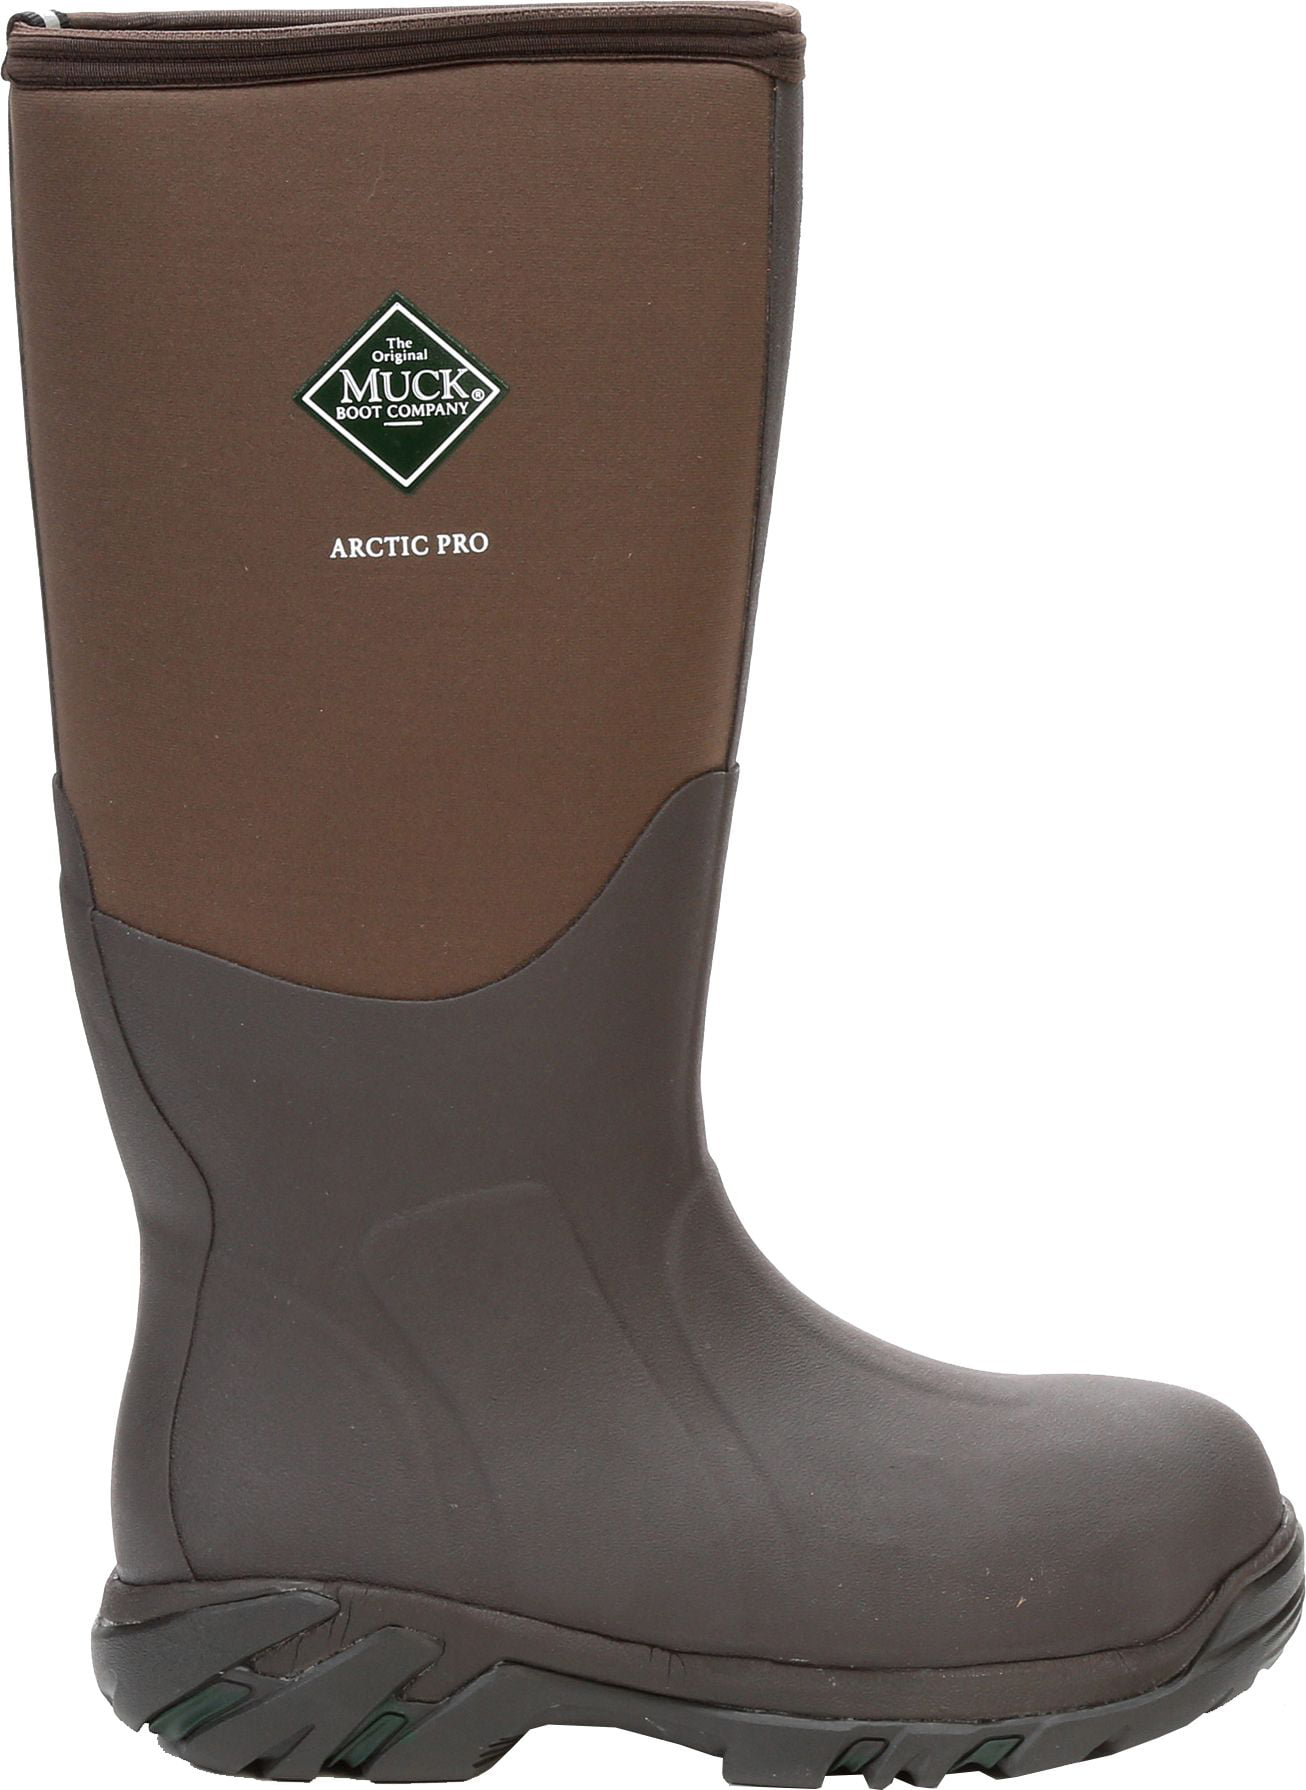 Muck Boot Company - Muck Boots Adult Arctic Pro Rubber Field Hunting ...